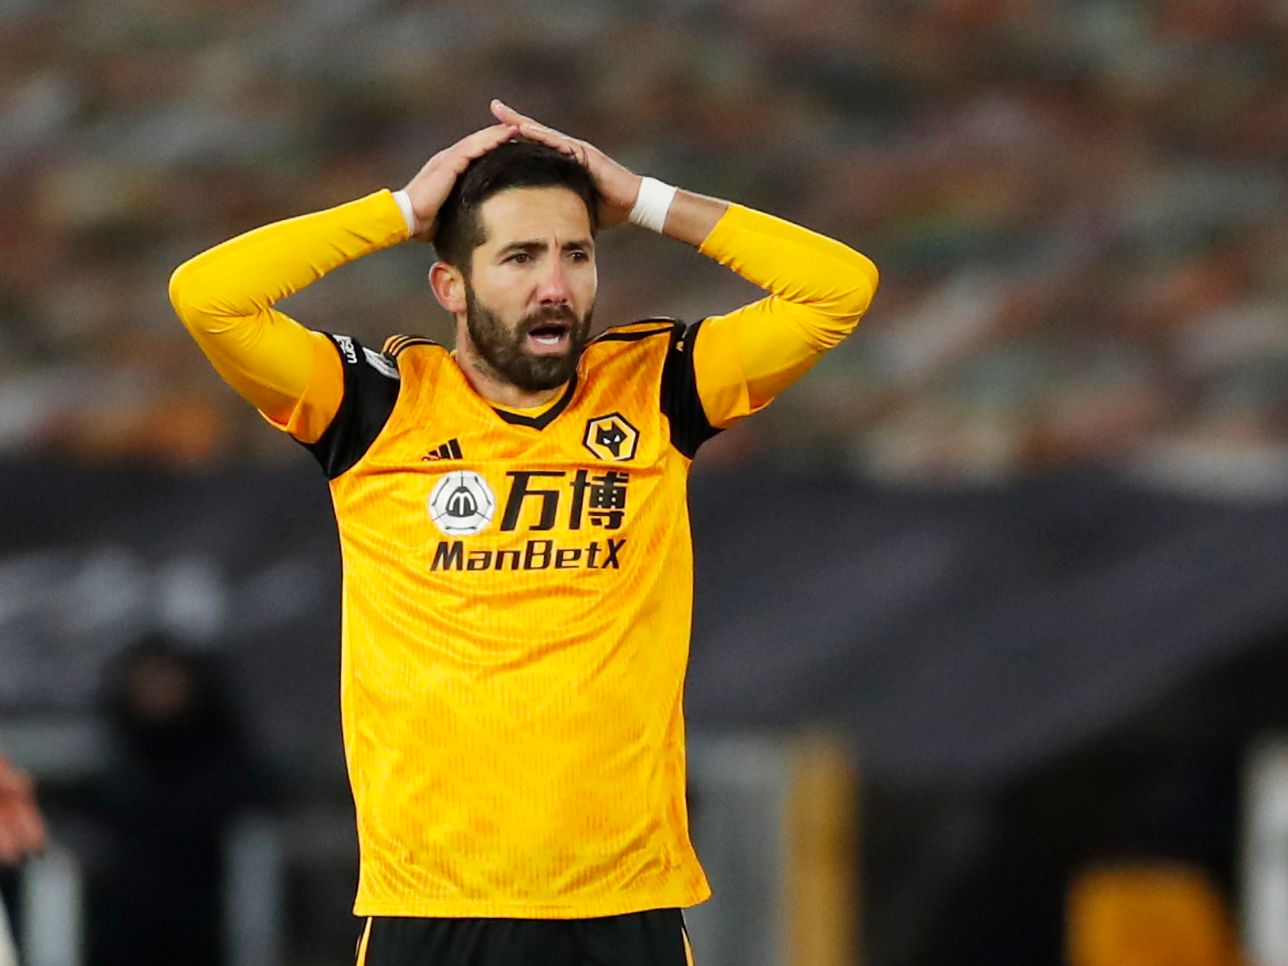 Soccer Football - Premier League - Wolverhampton Wanderers v Southampton - Molineux Stadium, Wolverhampton, Britain - November 23, 2020 Wolverhampton Wanderers' Joao Moutinho reacts Pool via REUTERS/Andrew Boyers EDITORIAL USE ONLY. No use with unauthorized audio, video, data, fixture lists, club/league logos or 'live' services. Online in-match use limited to 75 images, no video emulation. No use in betting, games or single club /league/player publications.  Please contact your account represent